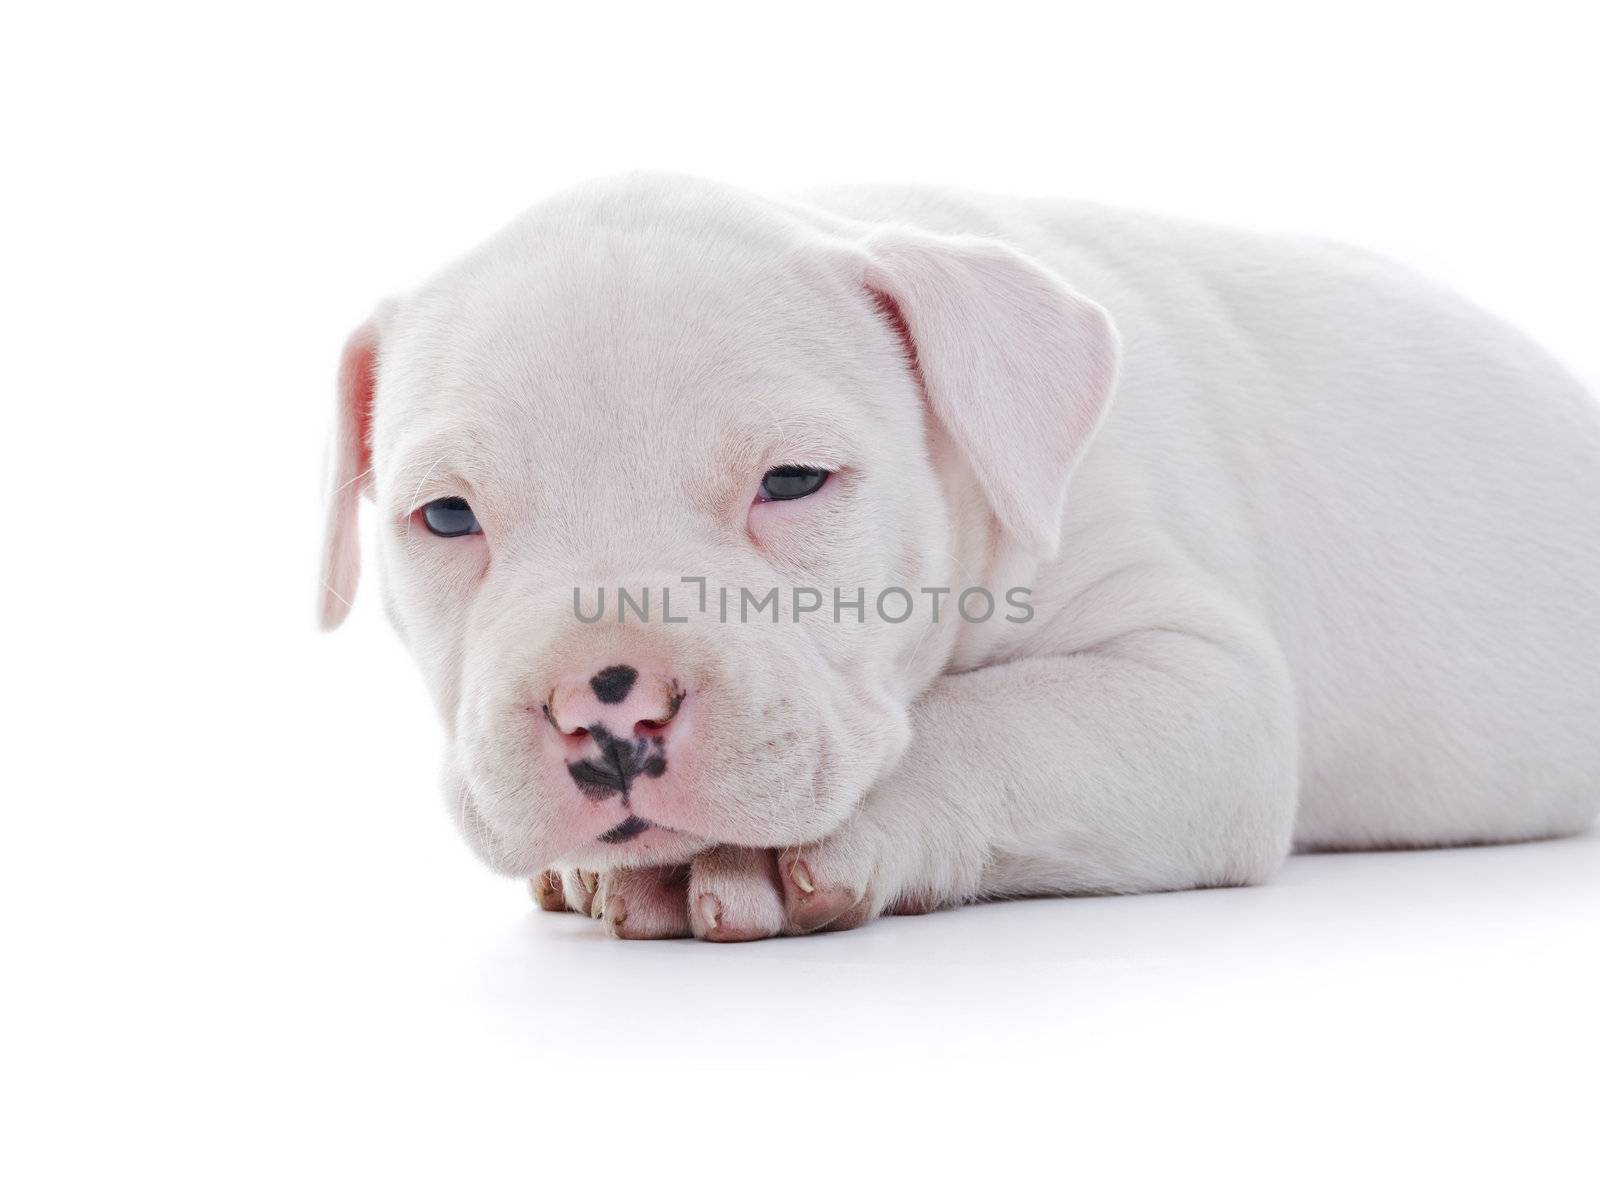 American Staffordshire Terrier by milinz